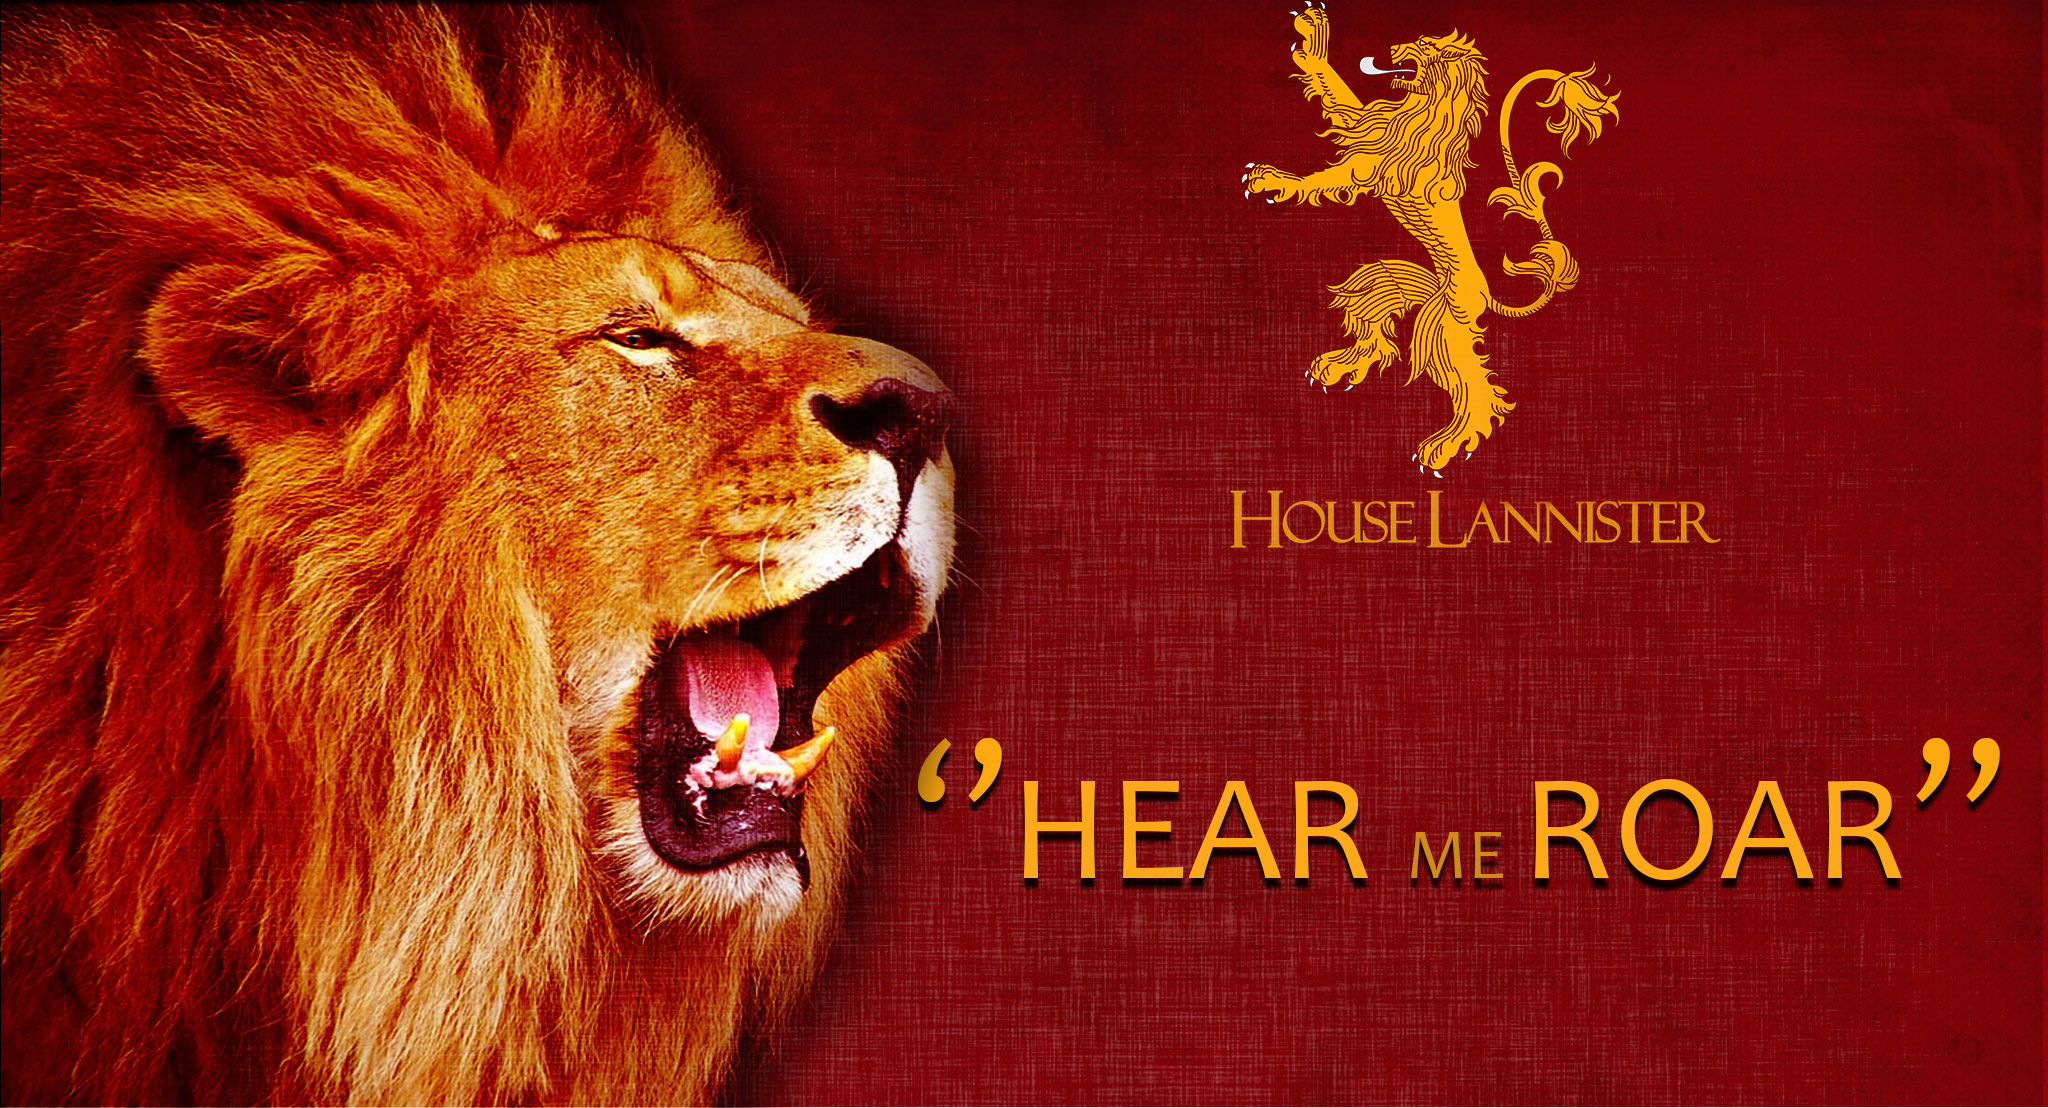 House Lannister Cover